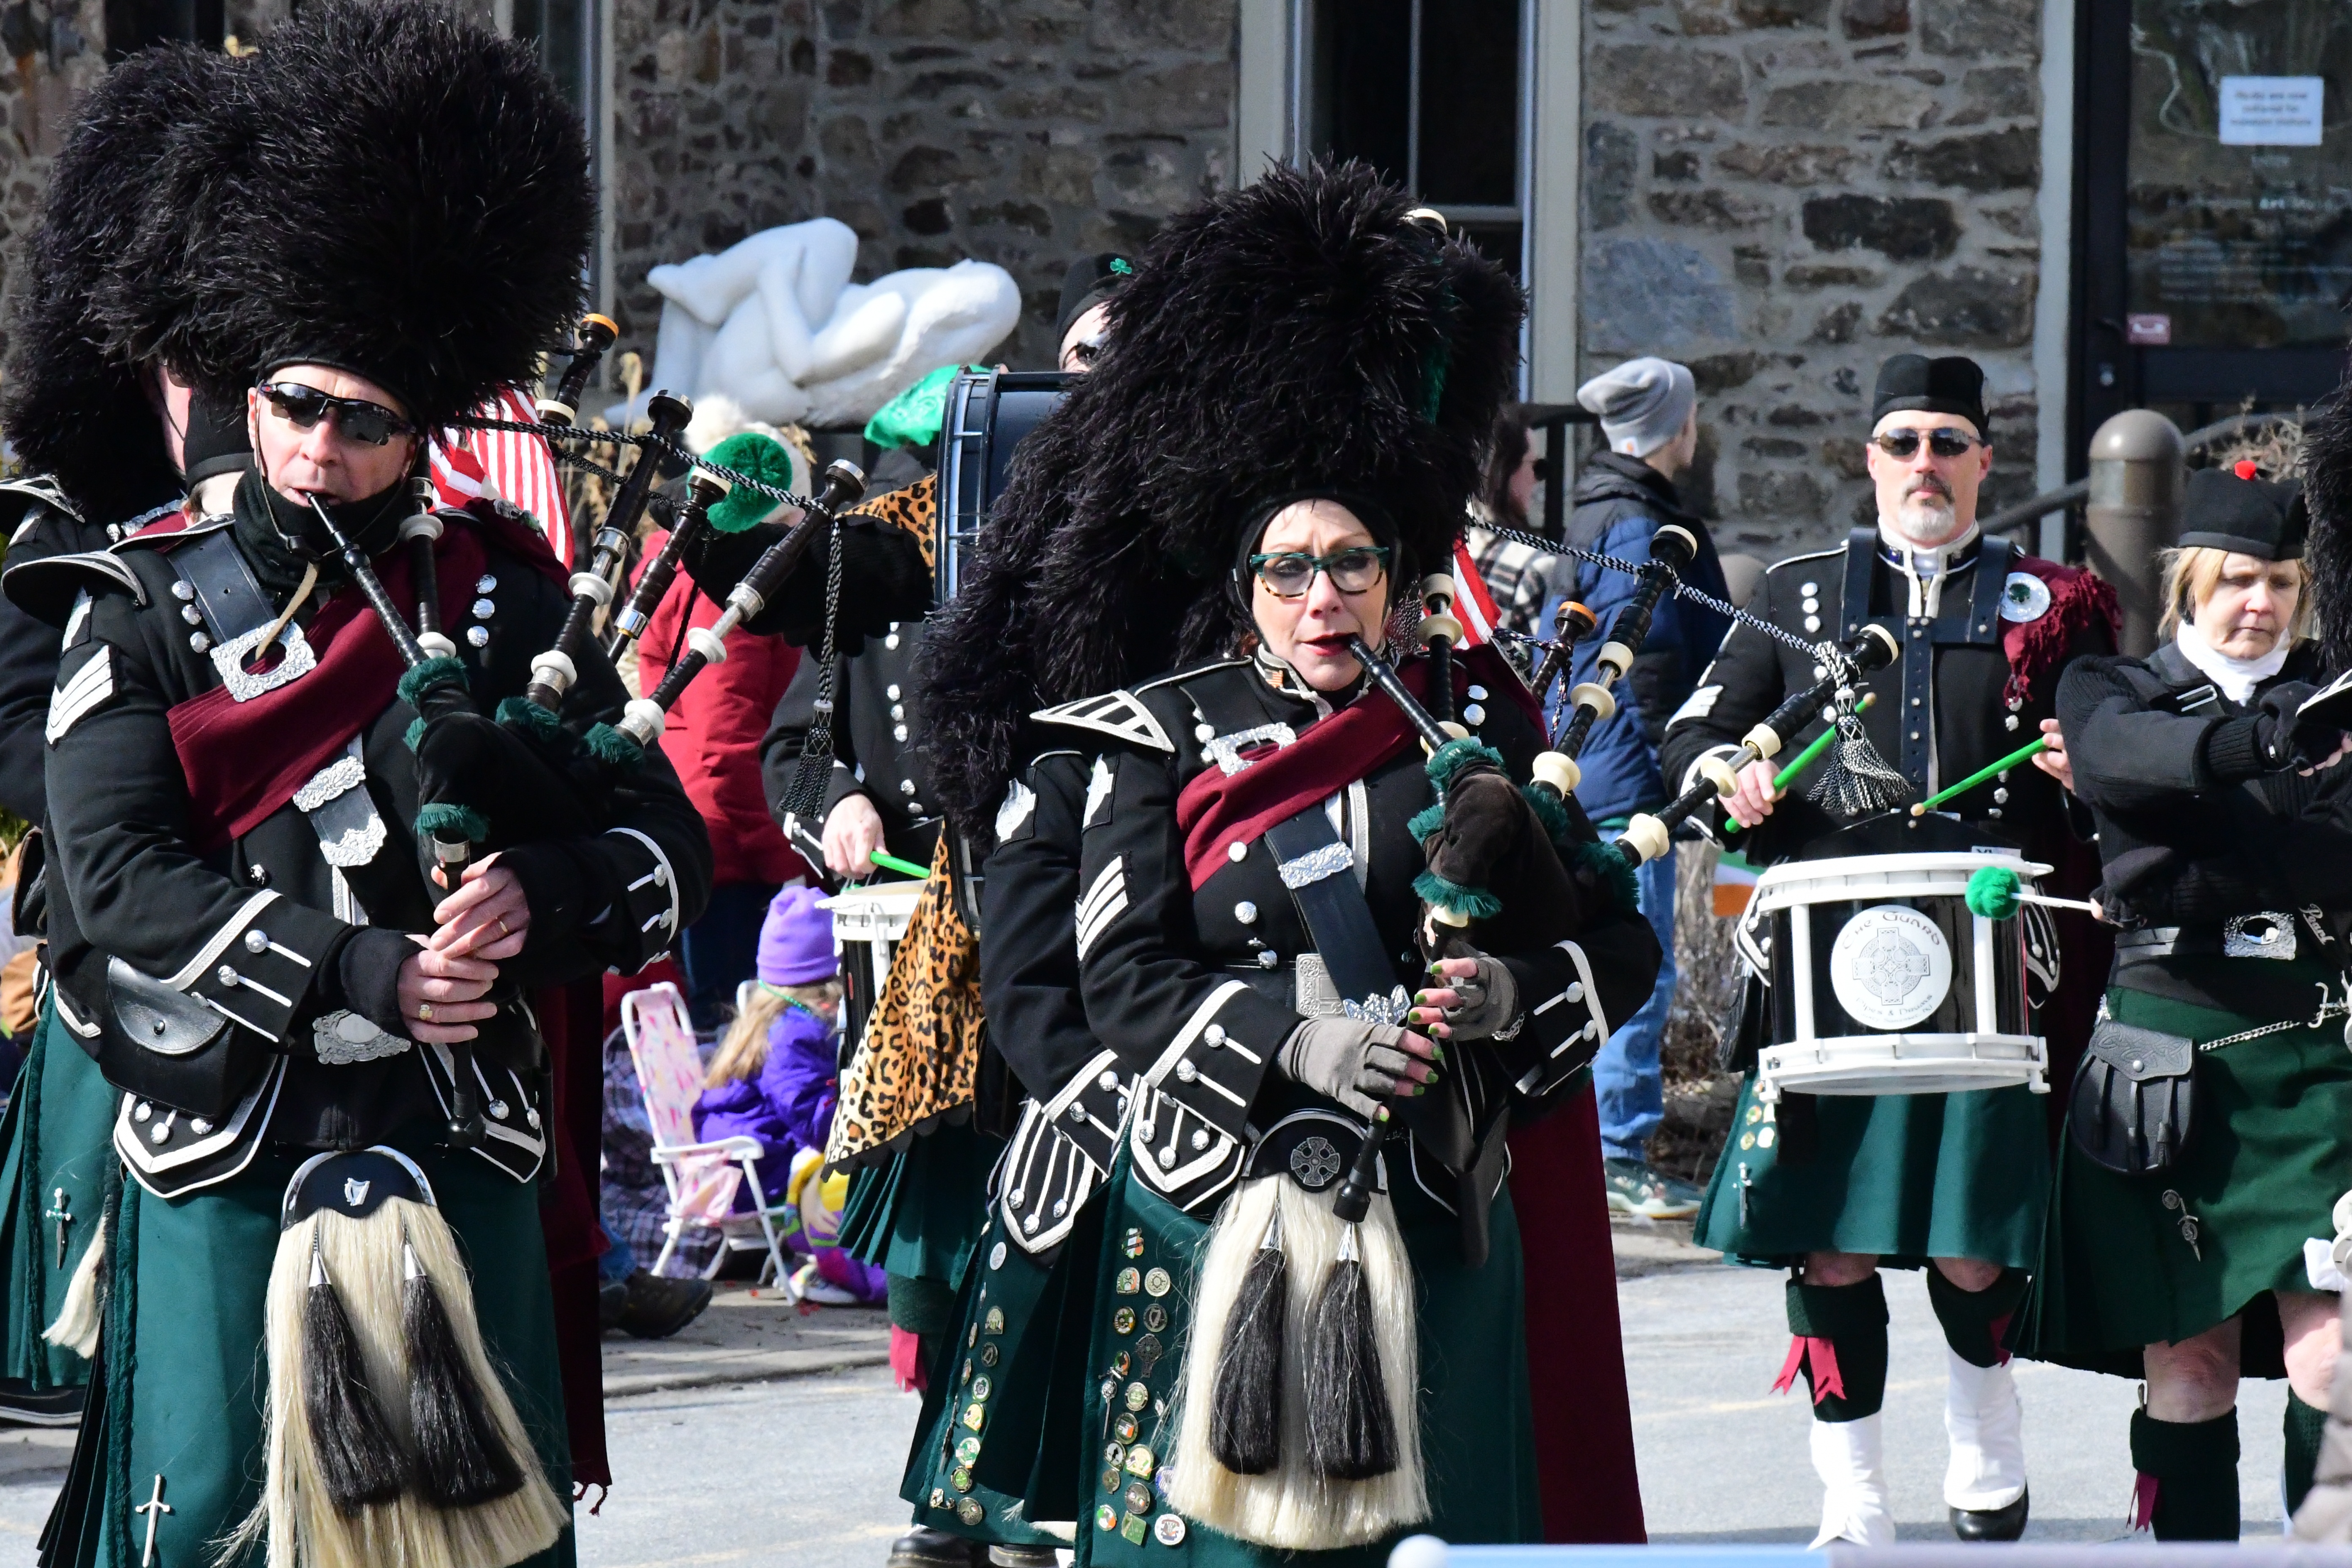 The 2022 St Patrick's Day Parade hosted by the Friendly Sons of St Patrick Hunterdon County took place in Clinton on March 13. Here, the Guard Pipes & Drums of Morris and Somerset Counties.